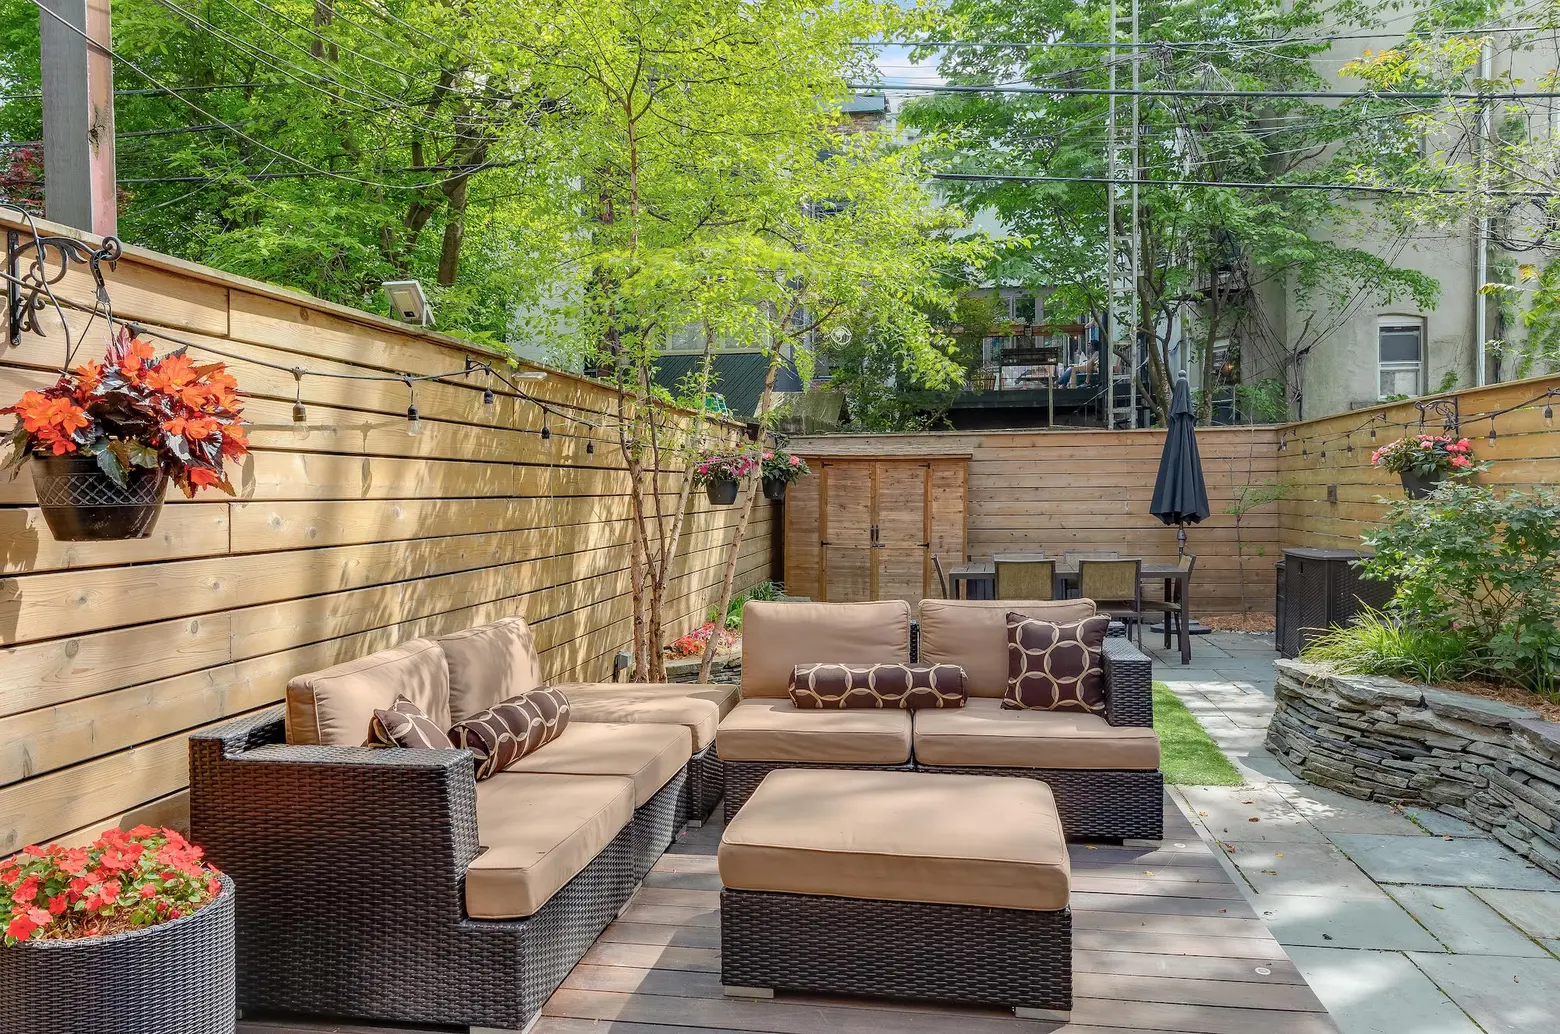 $2.3M Park Slope rowhouse has tranquil interiors and a party-ready backyard